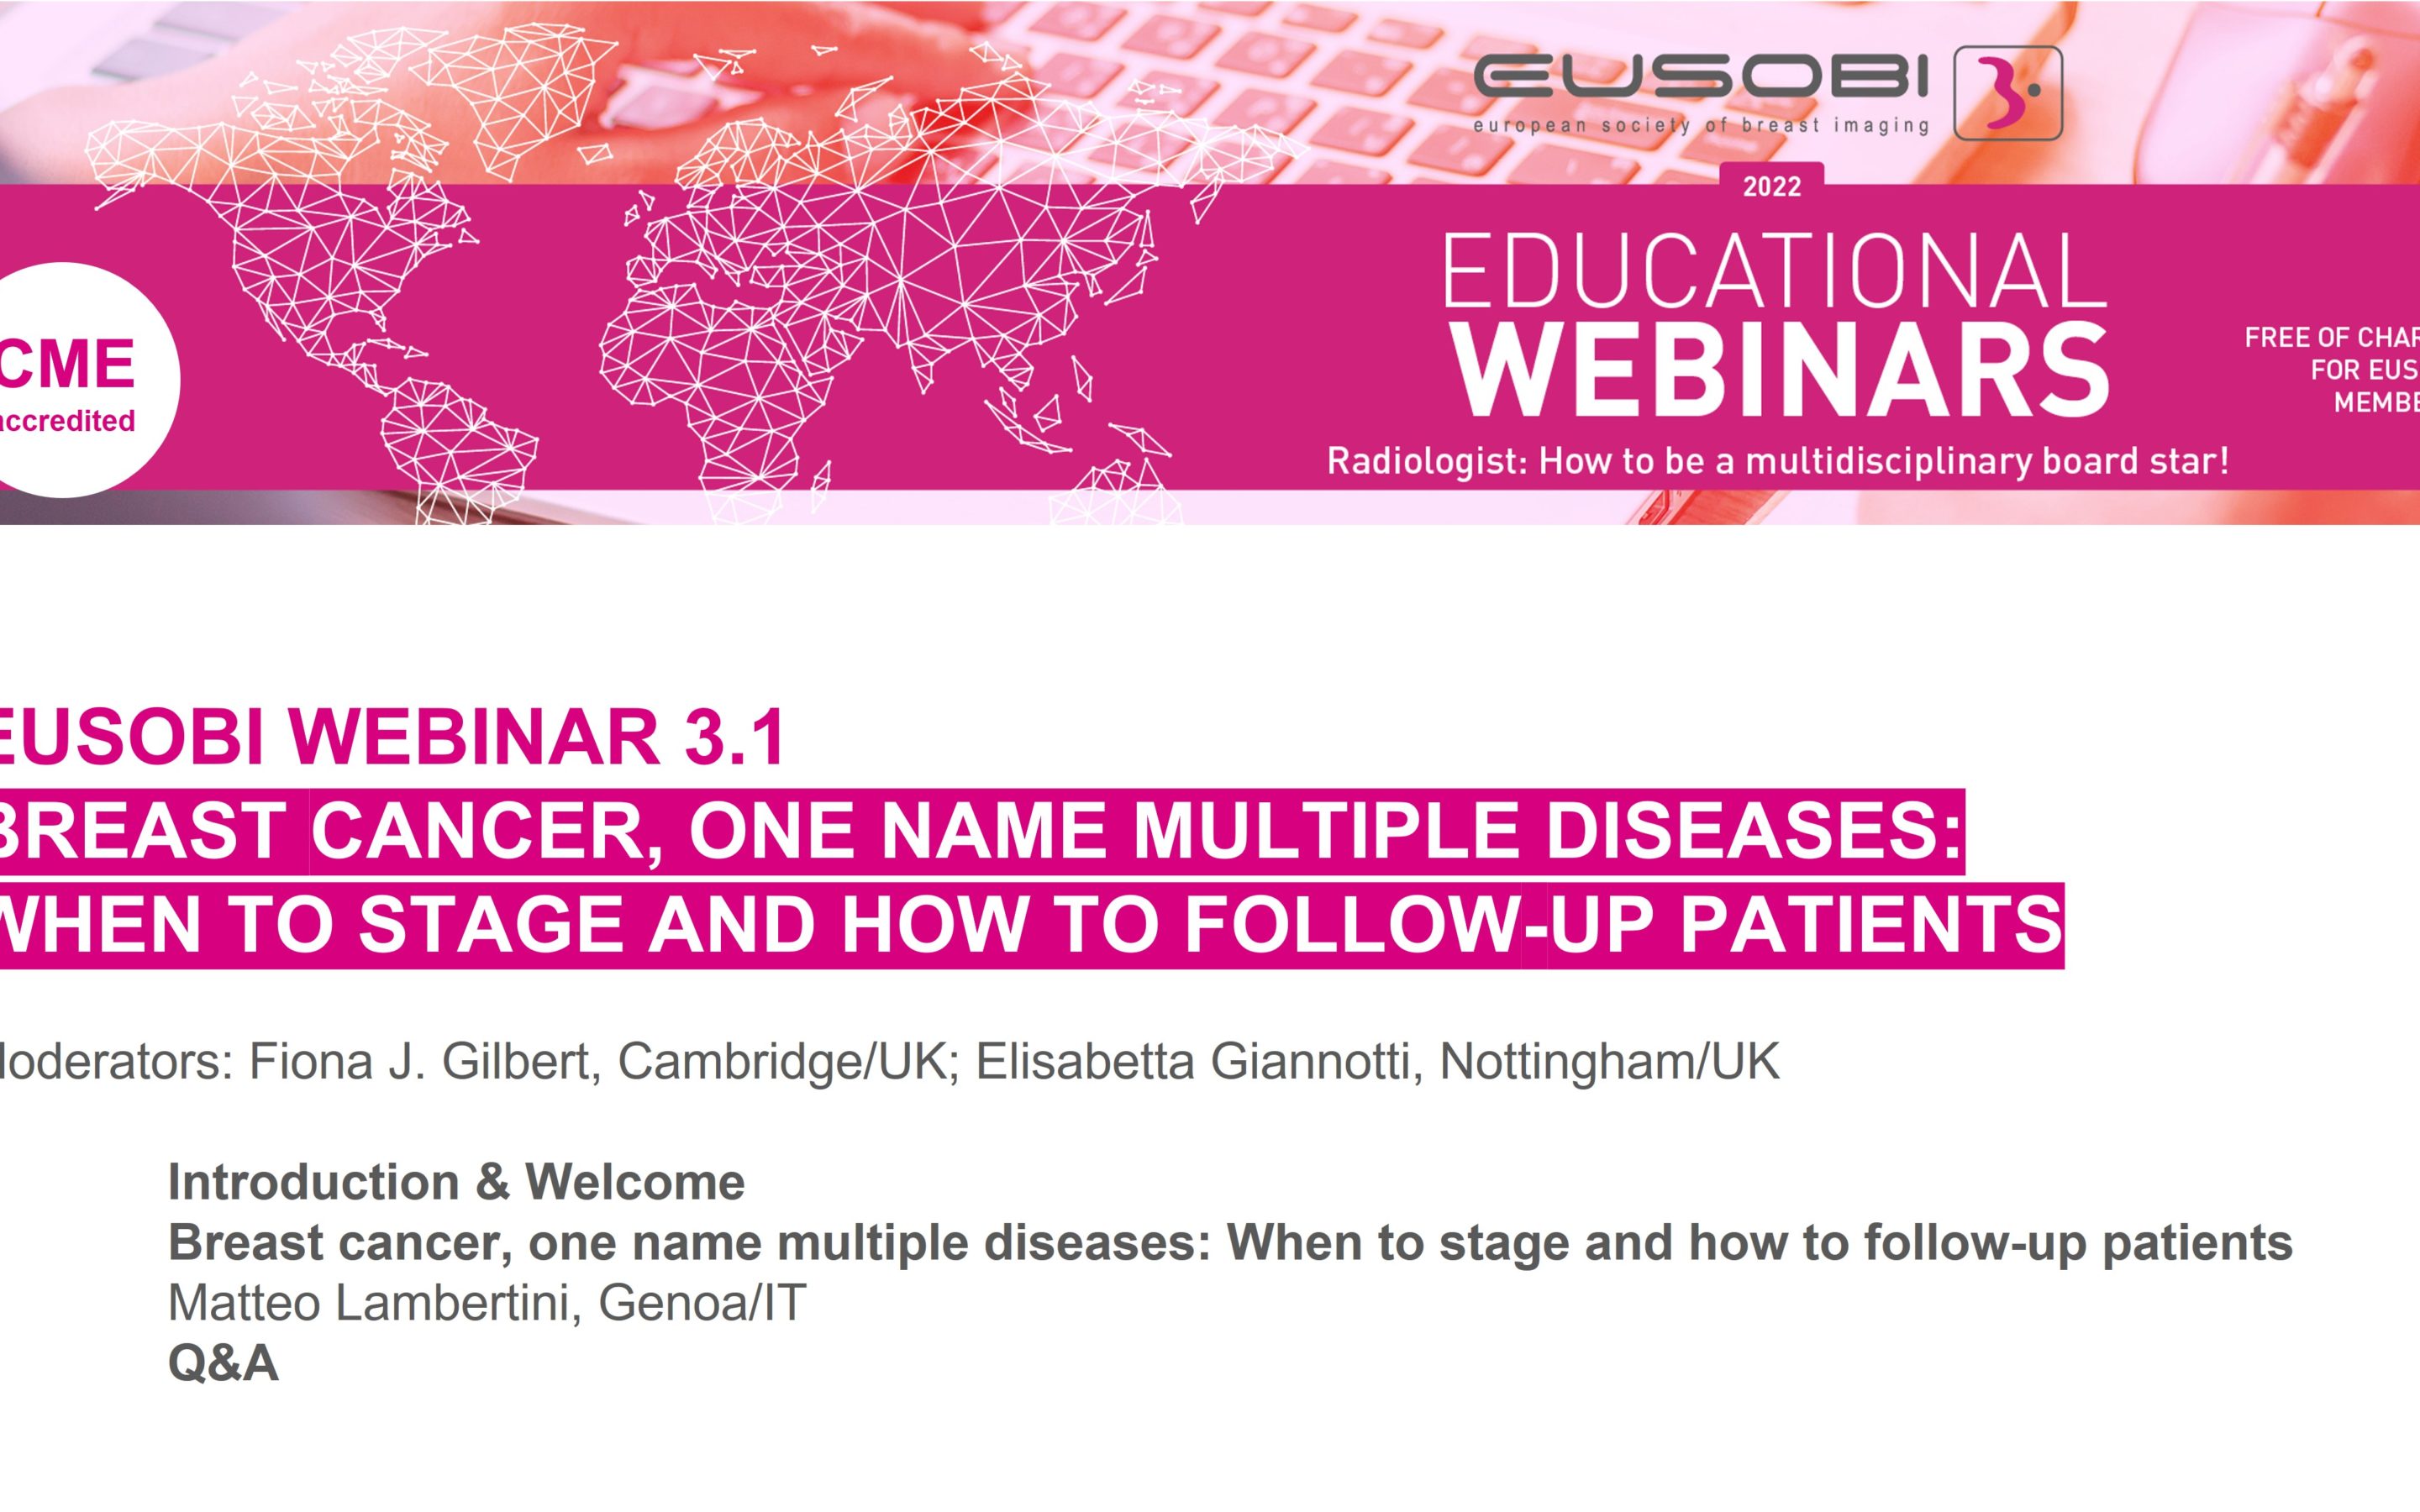 3.1 / Breast cancer, one name muliple diseases: When to stage and how to follow up patients